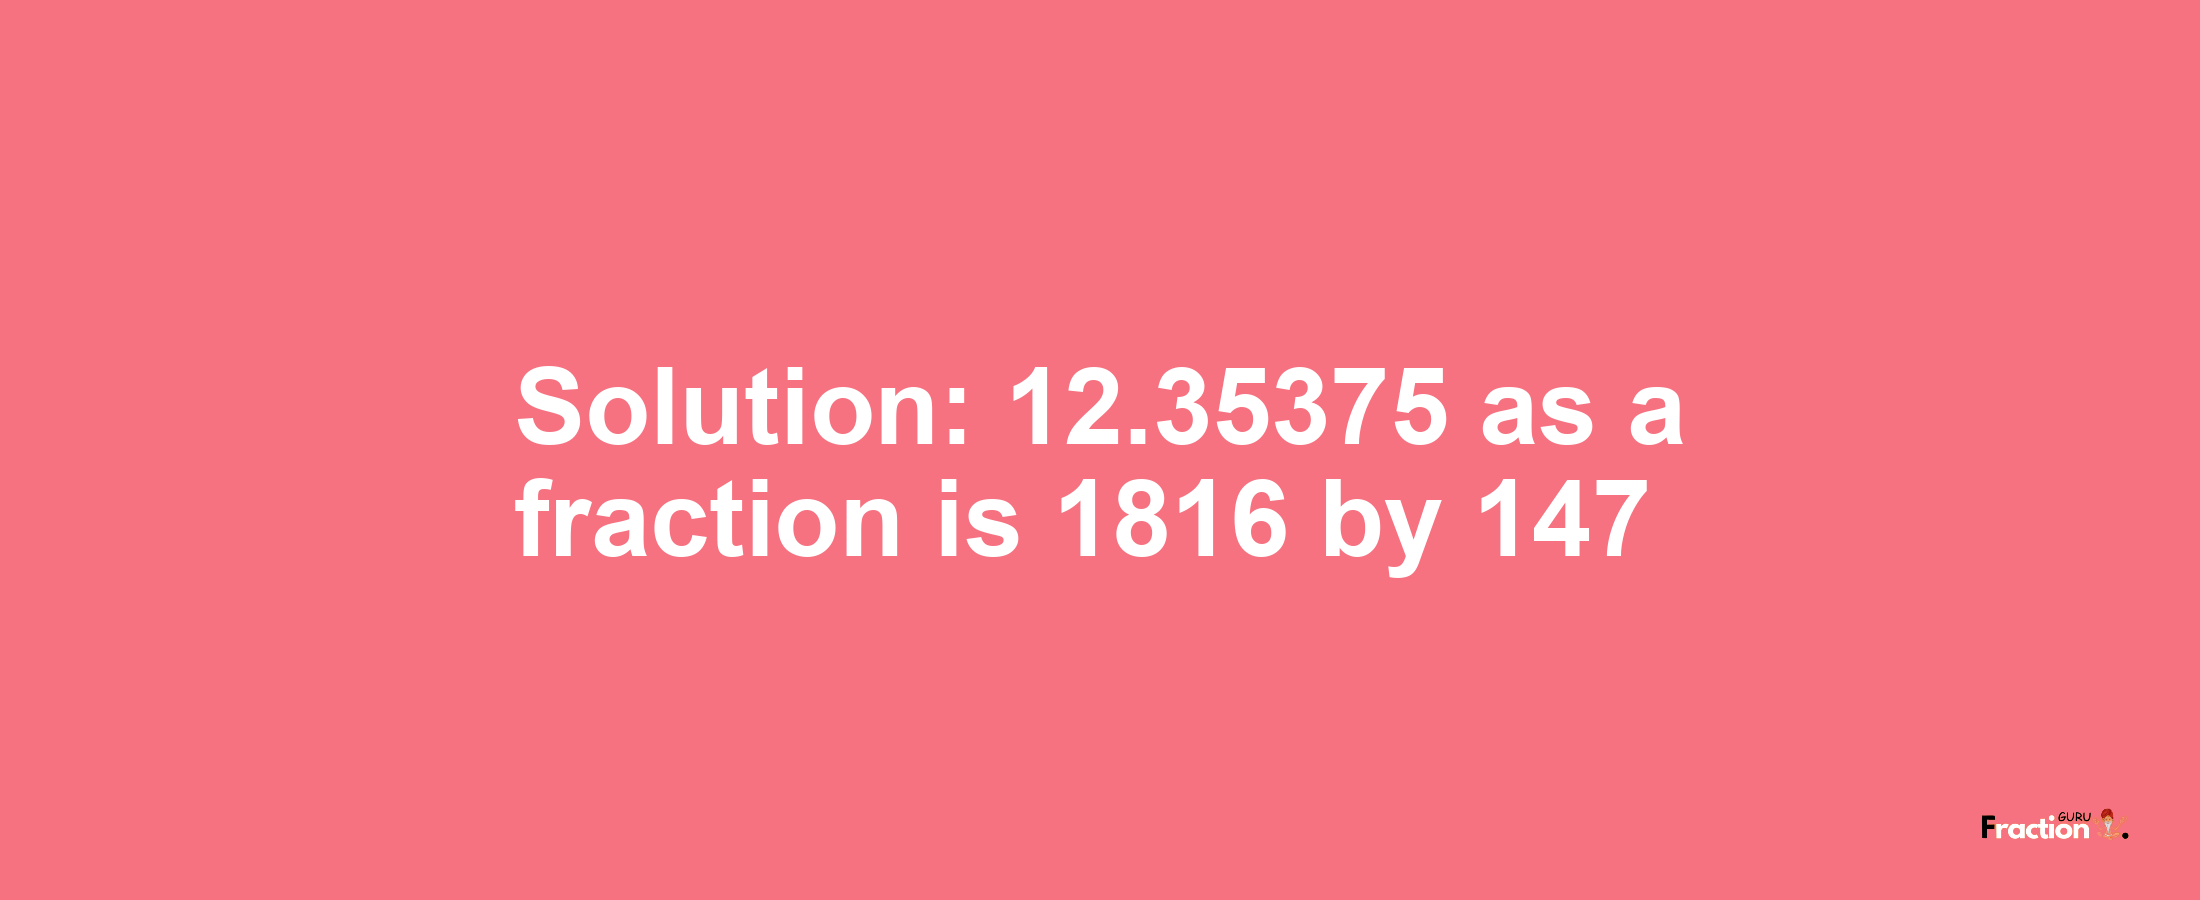 Solution:12.35375 as a fraction is 1816/147